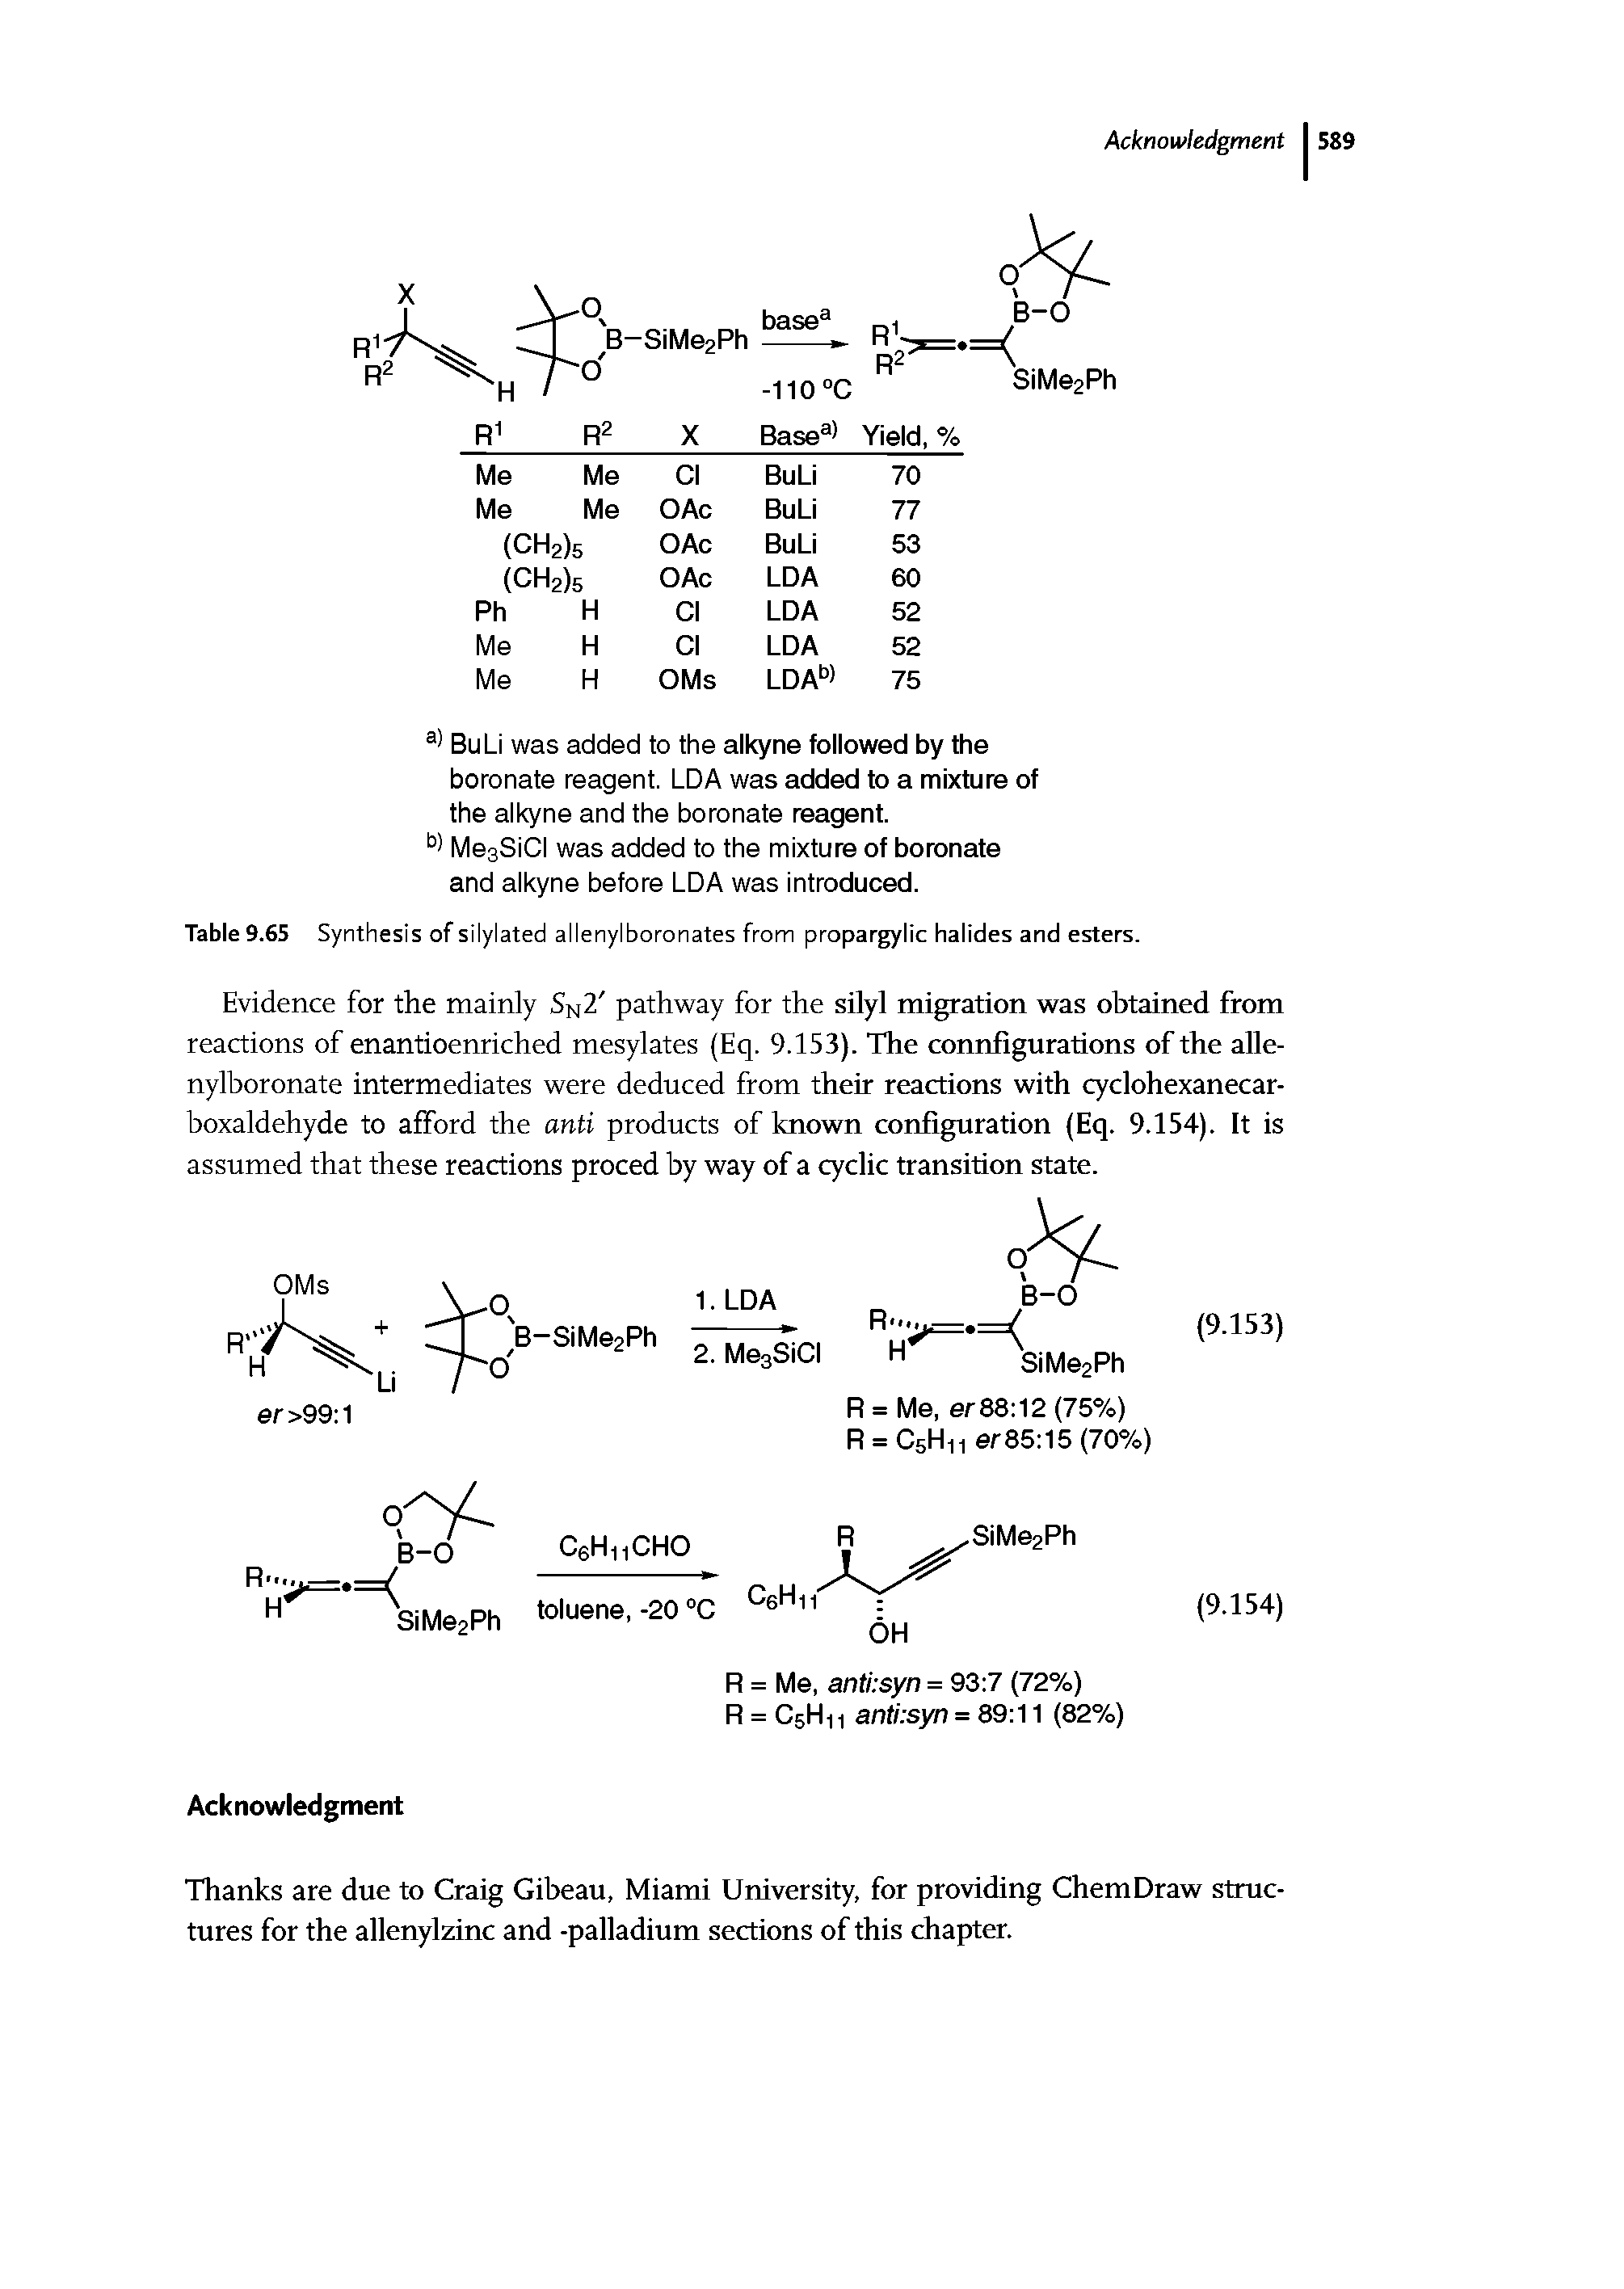 Table 9.65 Synthesis of silylated allenylboronates from propargylic halides and esters.